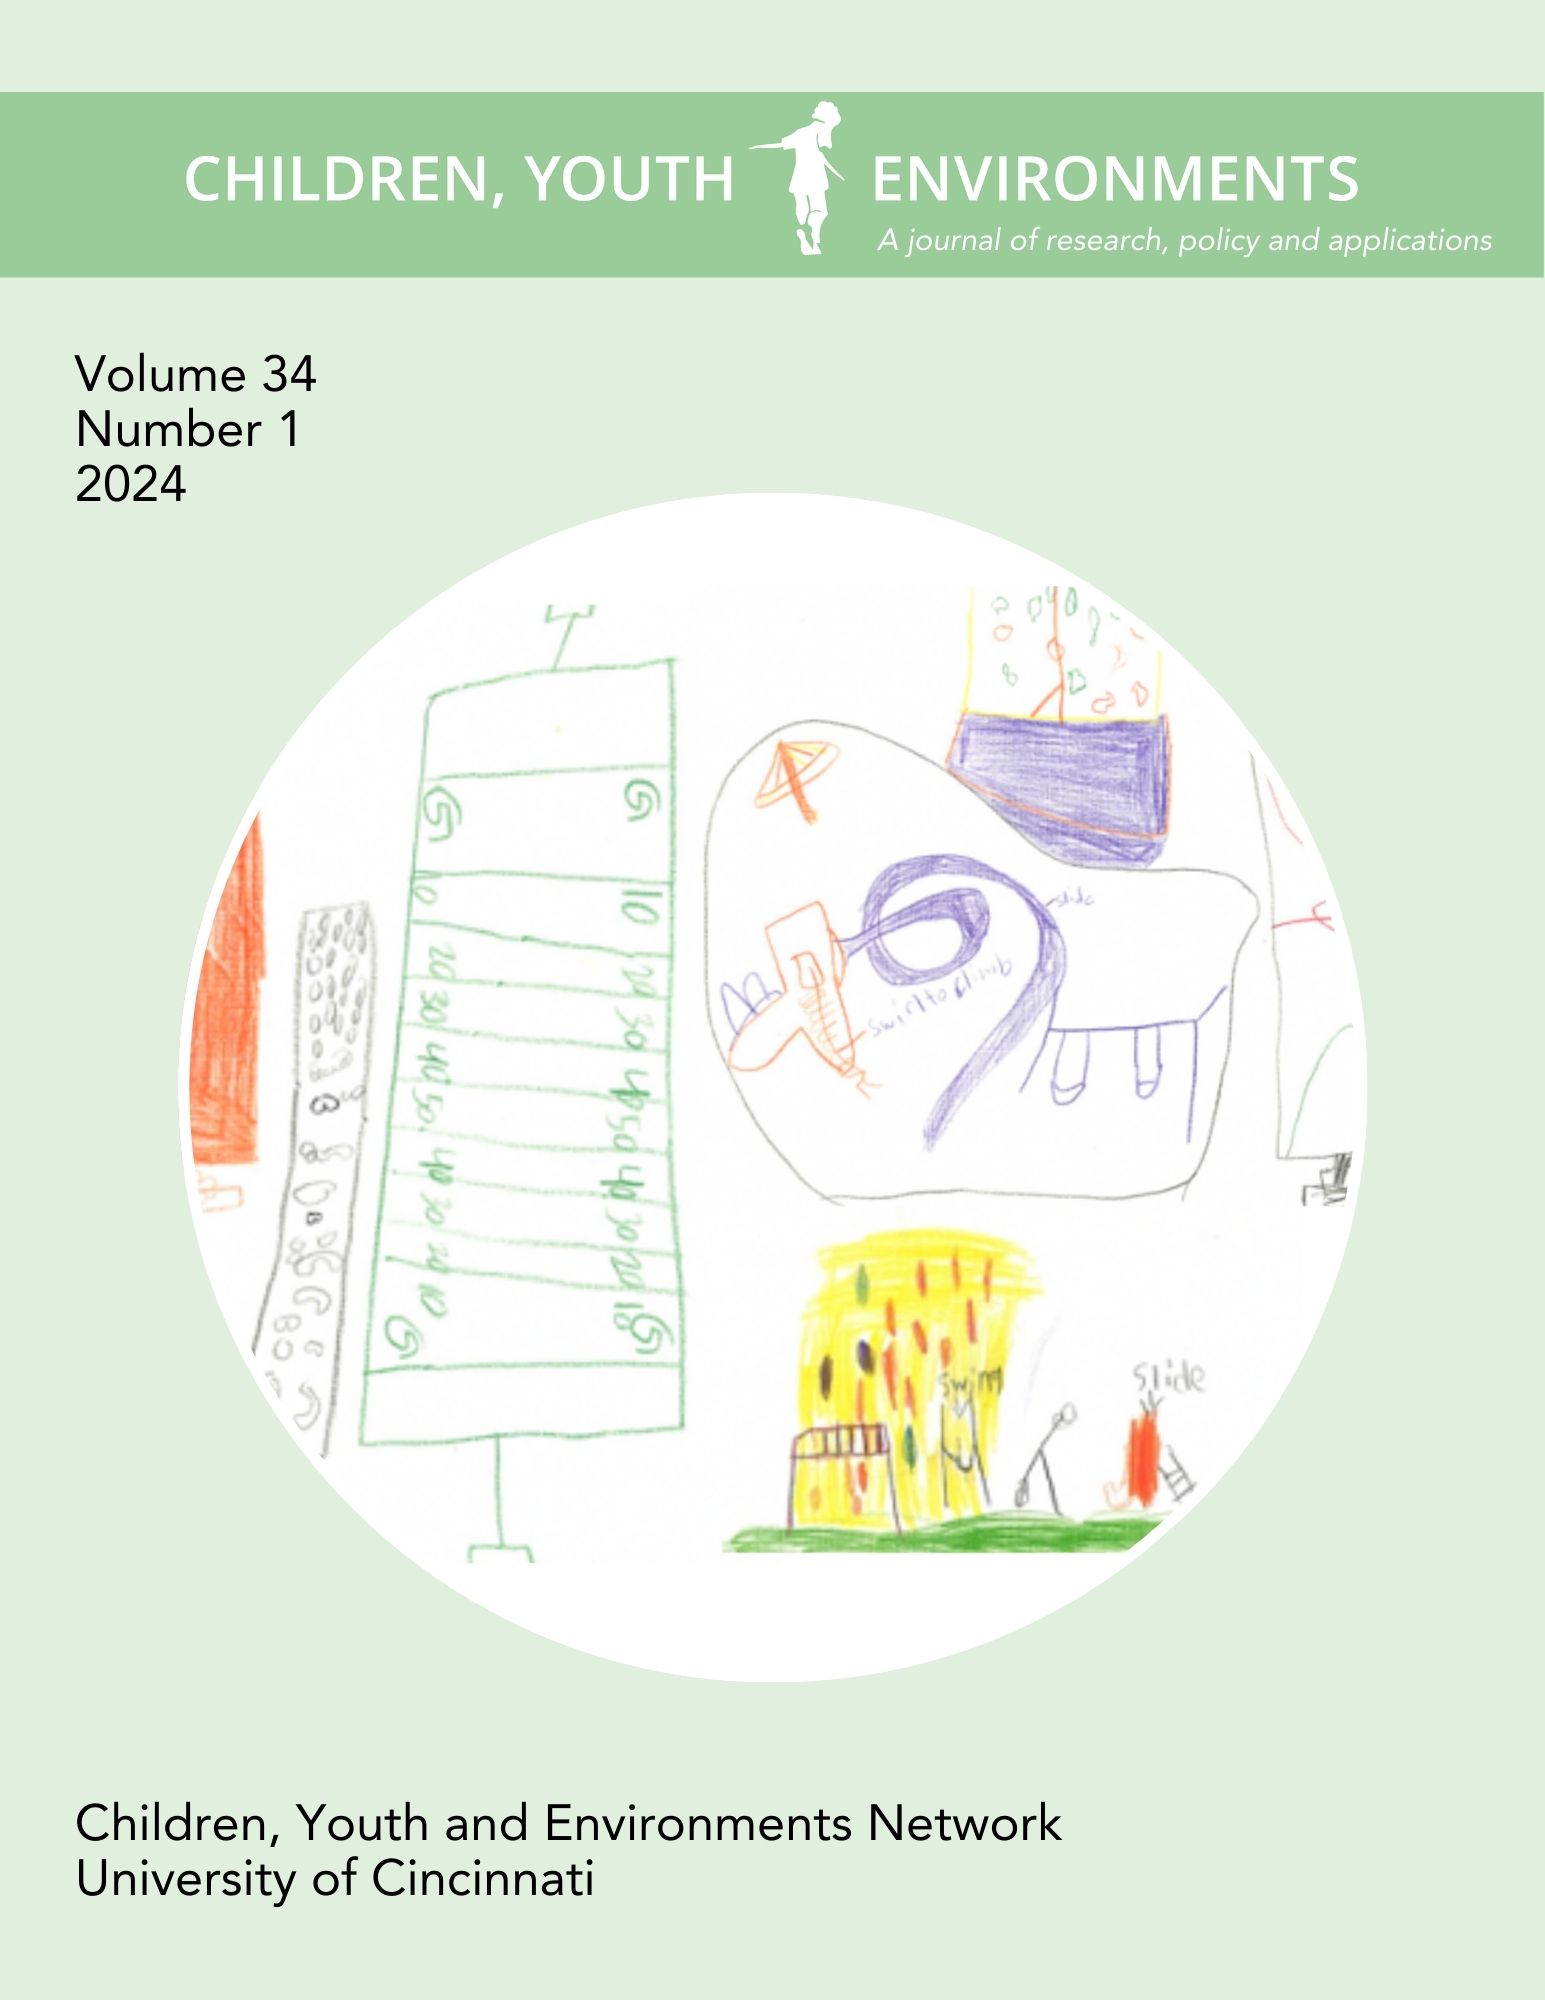 					View Vol. 34 No. 1 (2024): Children, Youth and Environments
				